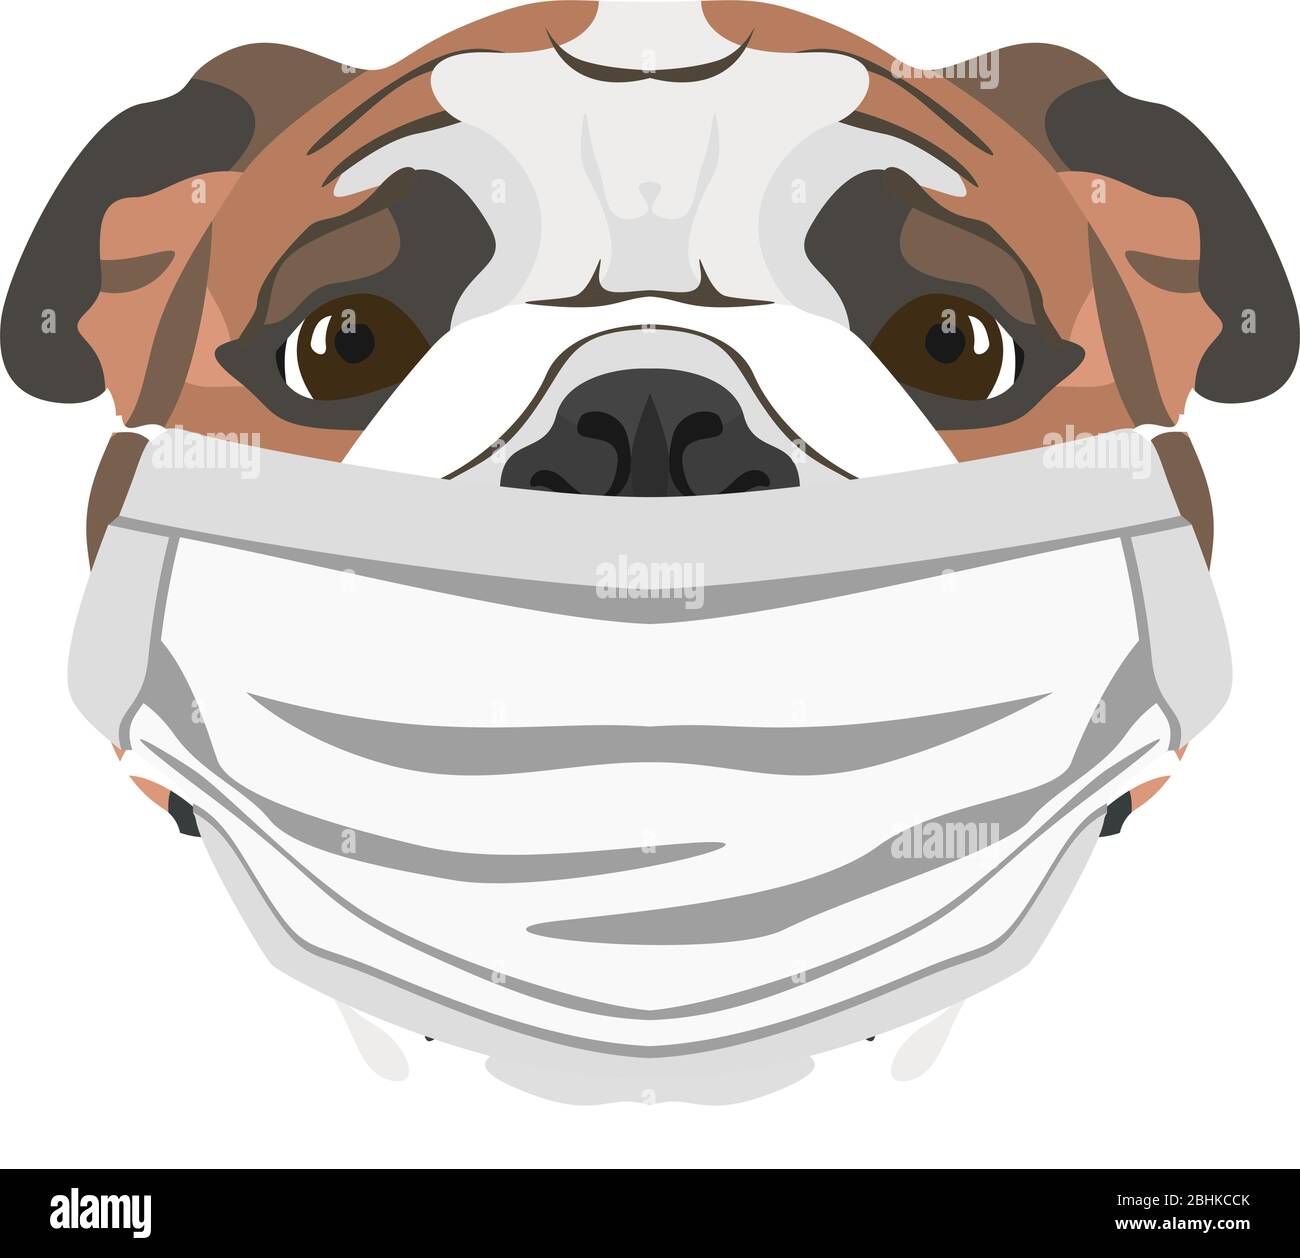 Illustration of an english bulldog with respirator. At this time of the pandemic, the design is a nice graphic for fans of dogs. Stock Vector